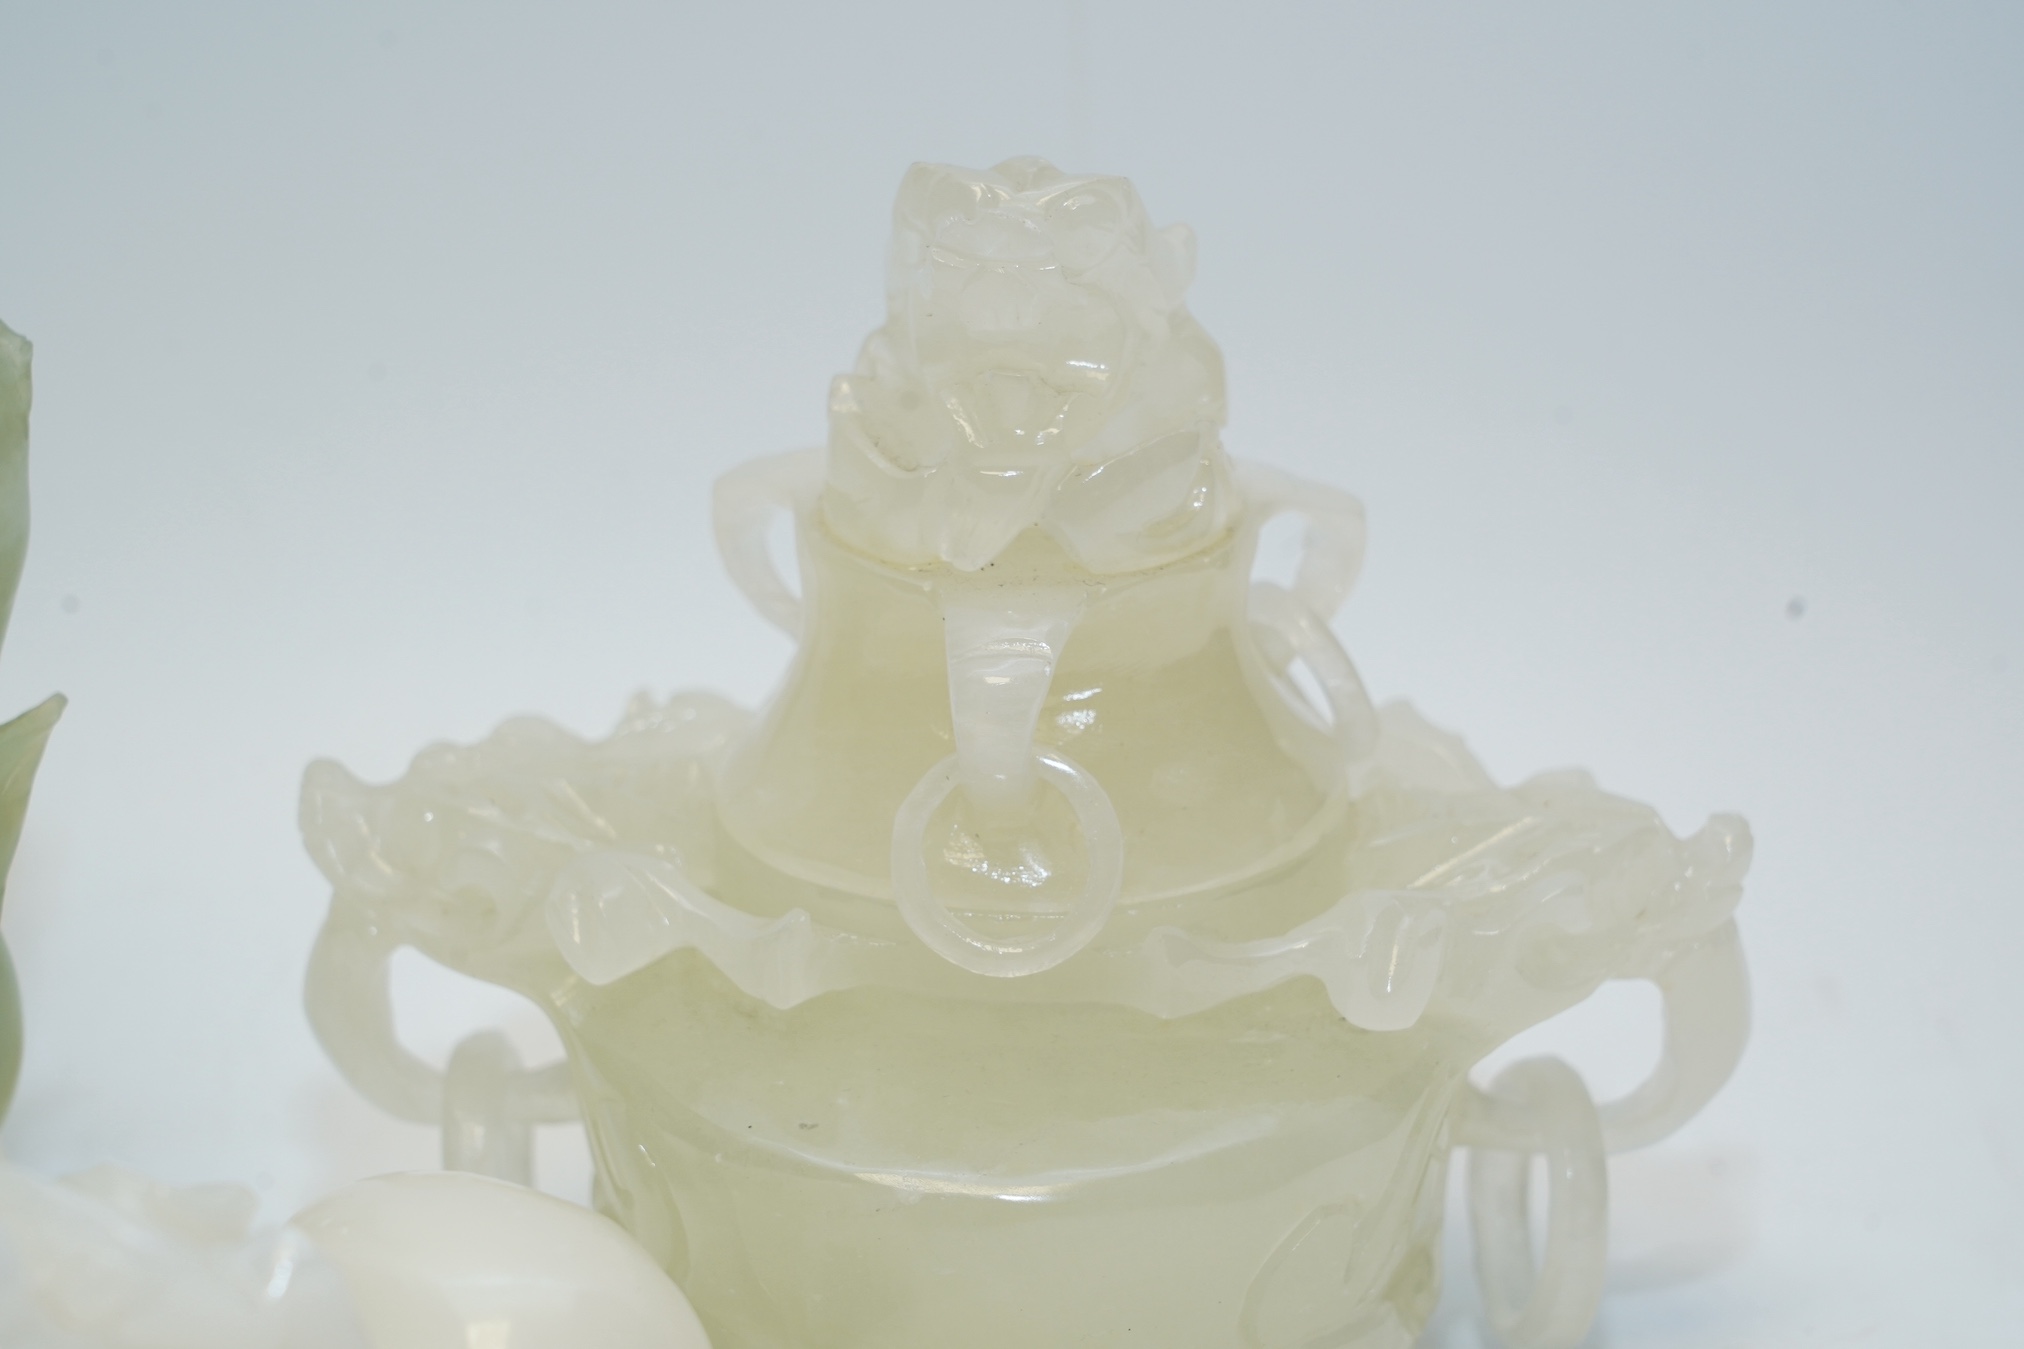 Four Chinese bowenite jade pieces including carving of a bird, largest 20cm. Condition - fair